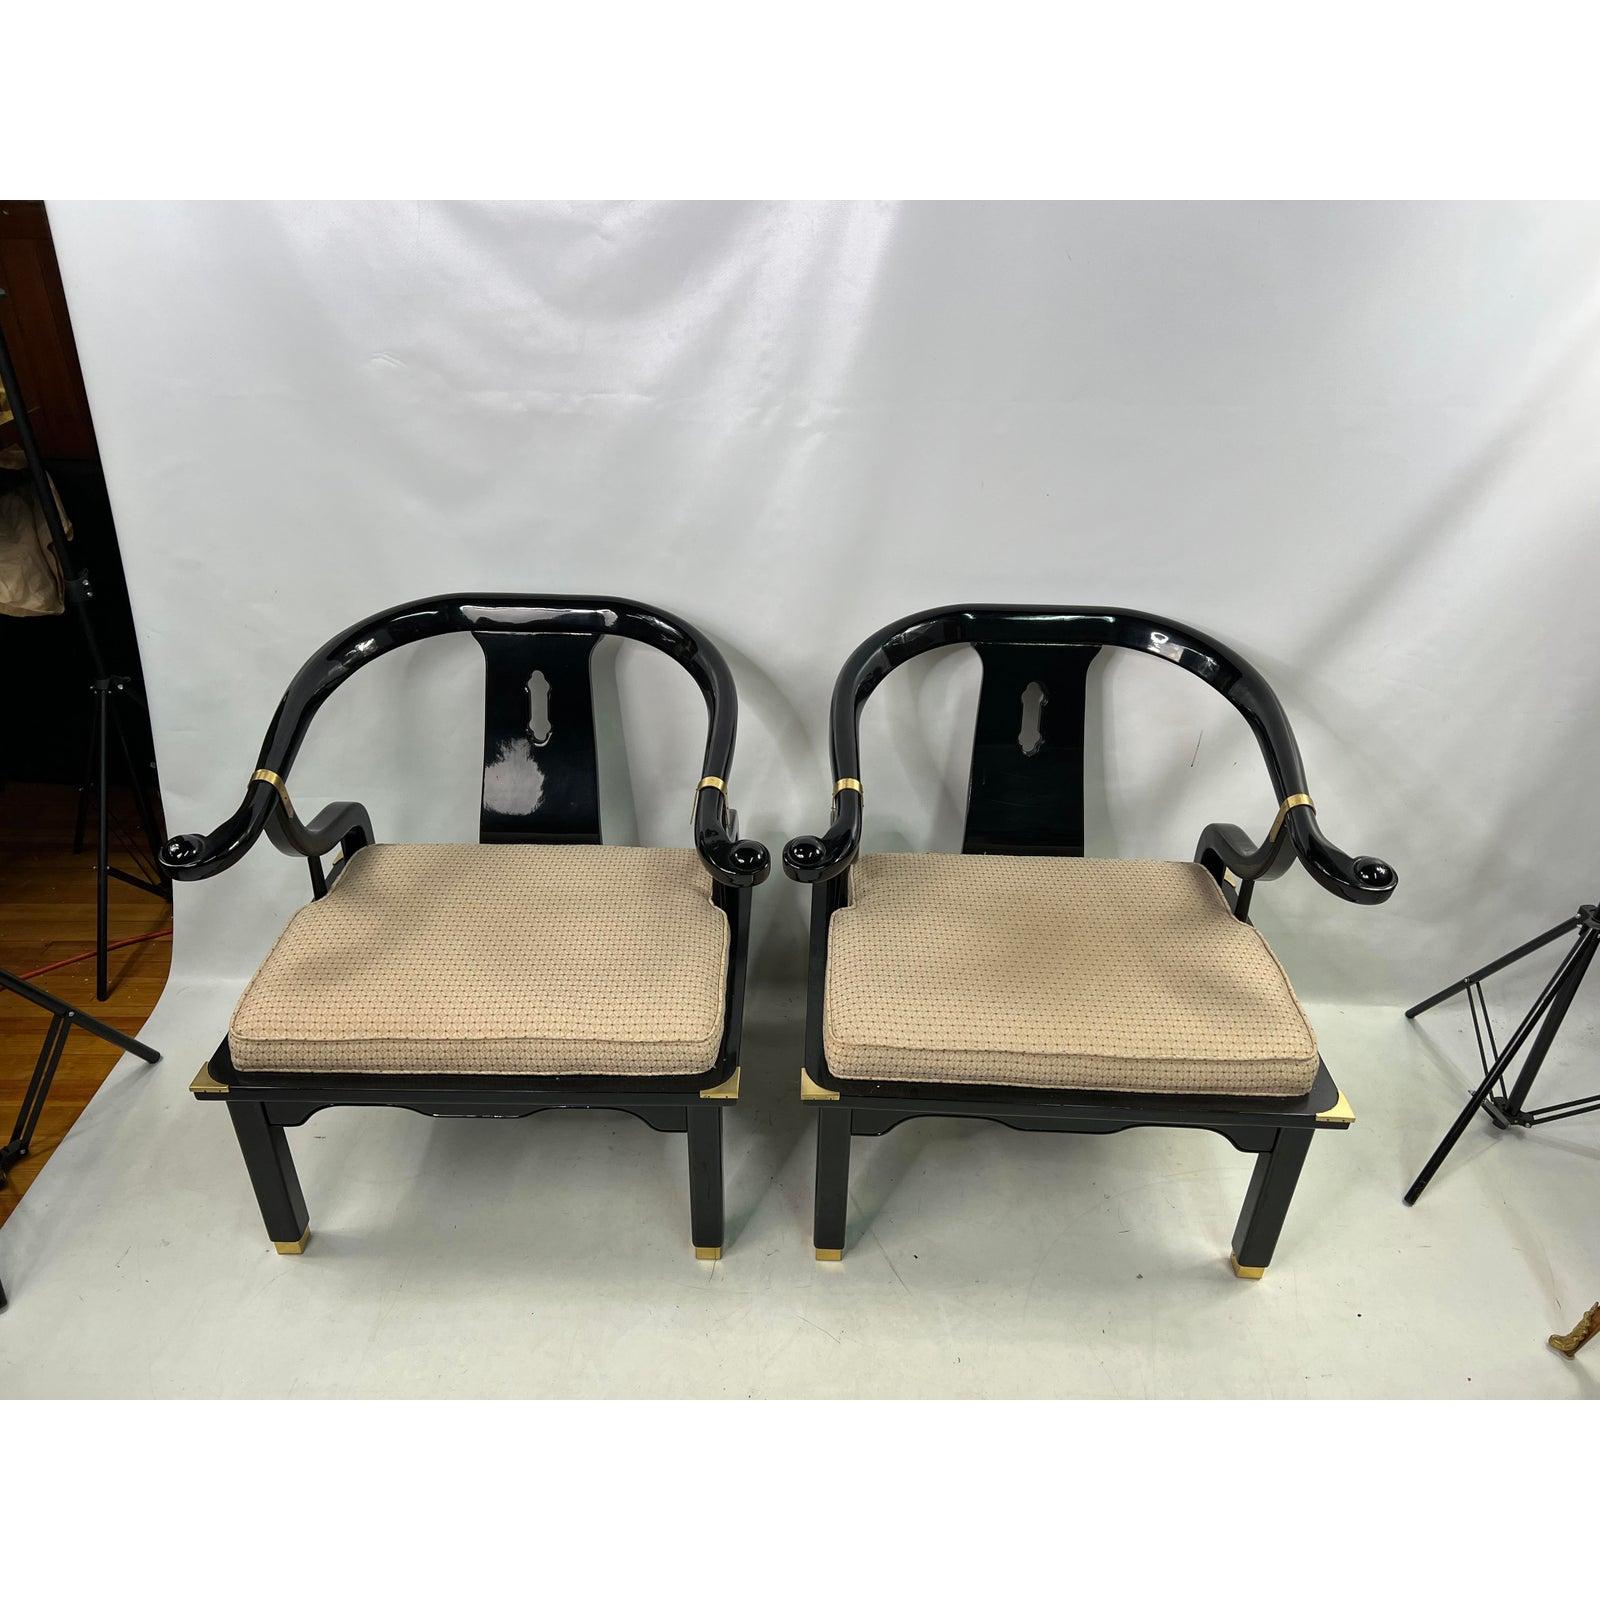 1960s James Mont style black Lacquer Asian Modern Chinoiserie Ming chairs - a pair.